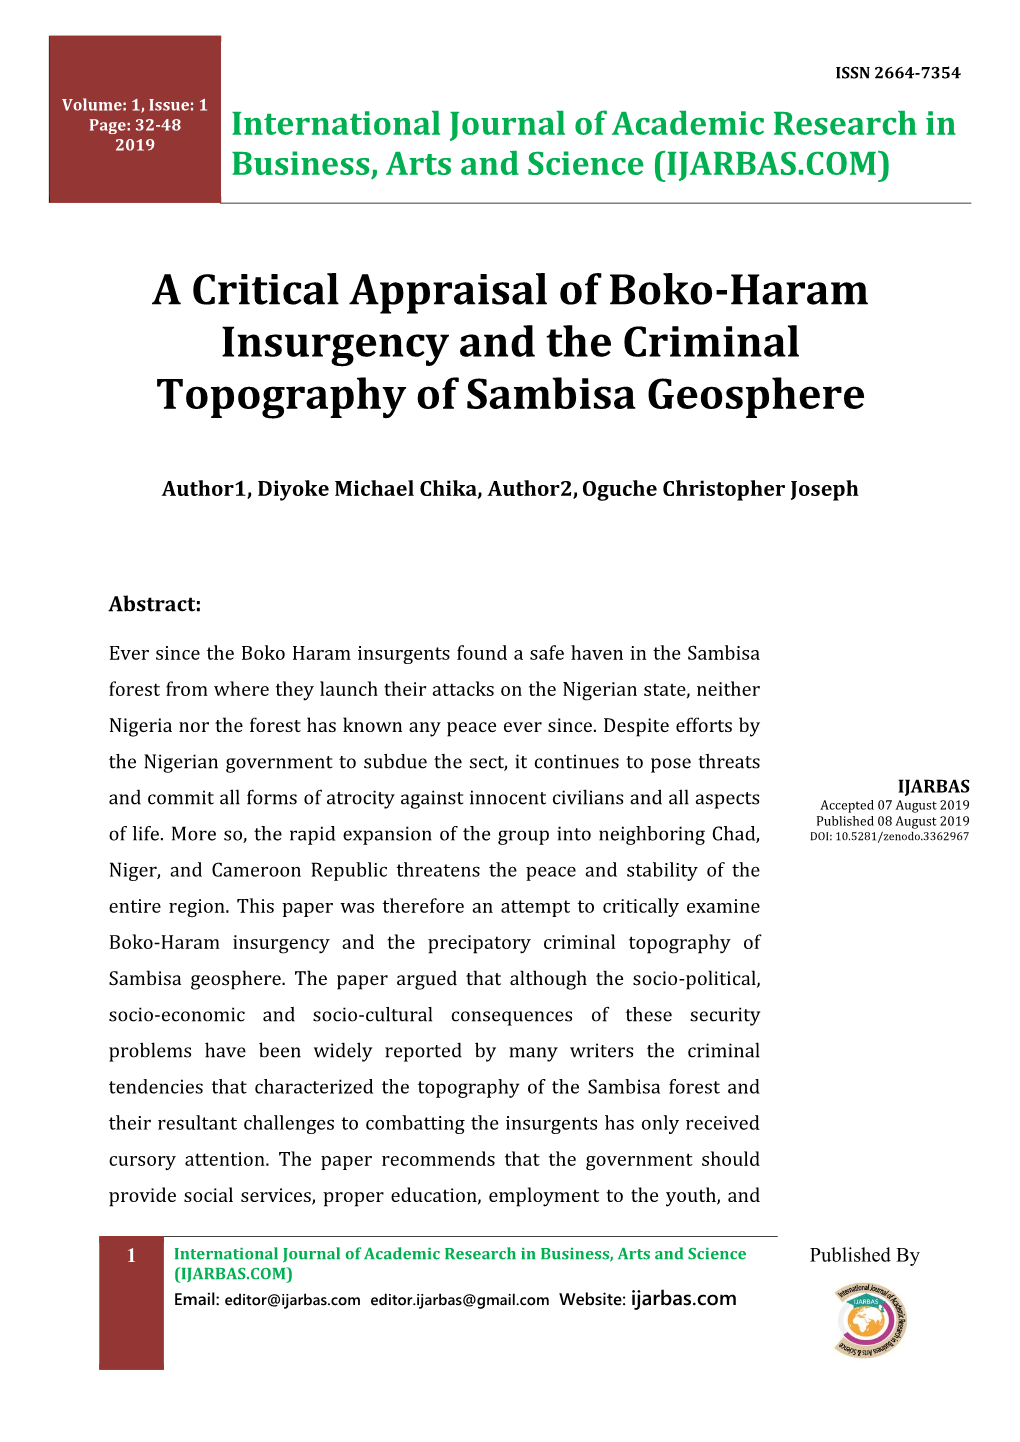 A Critical Appraisal of Boko-Haram Insurgency and the Criminal Topography of Sambisa Geosphere